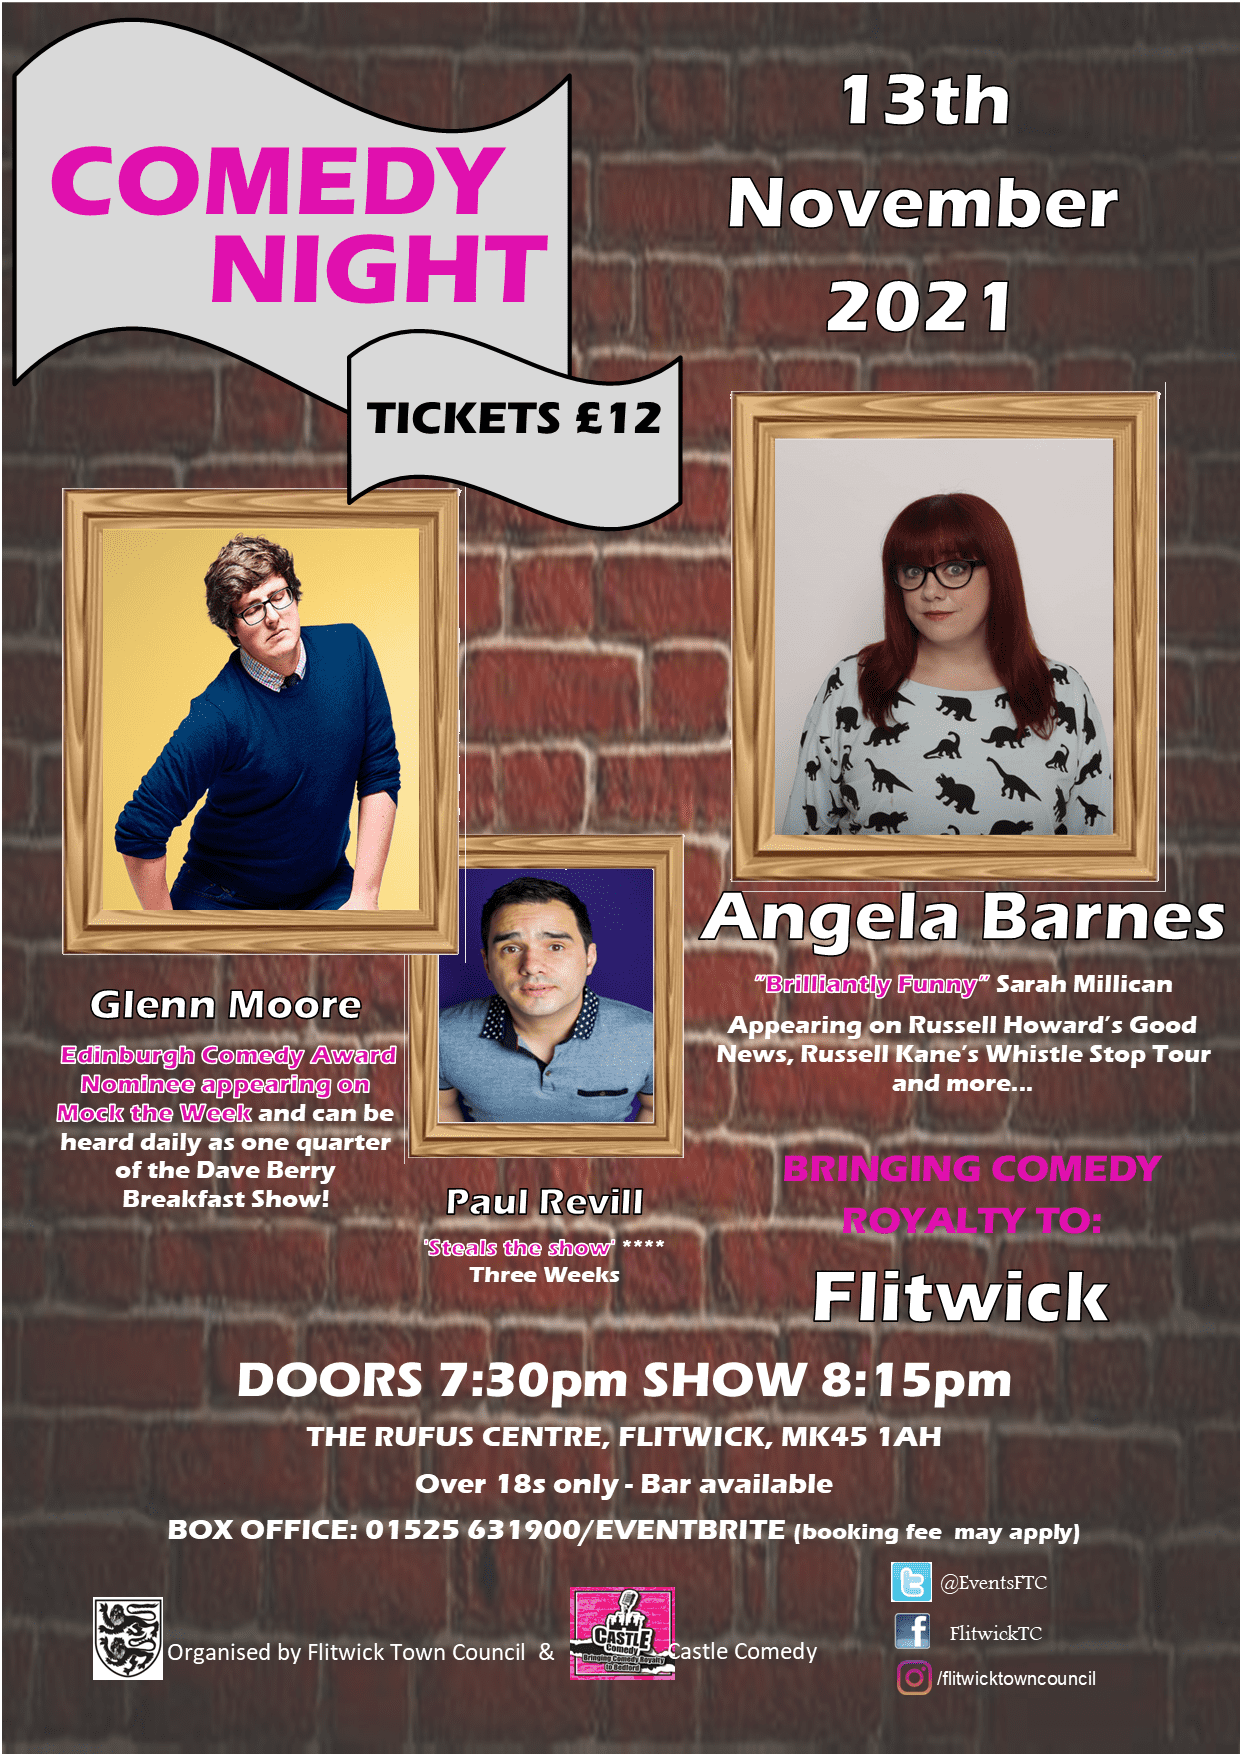 poster advertising comedy night